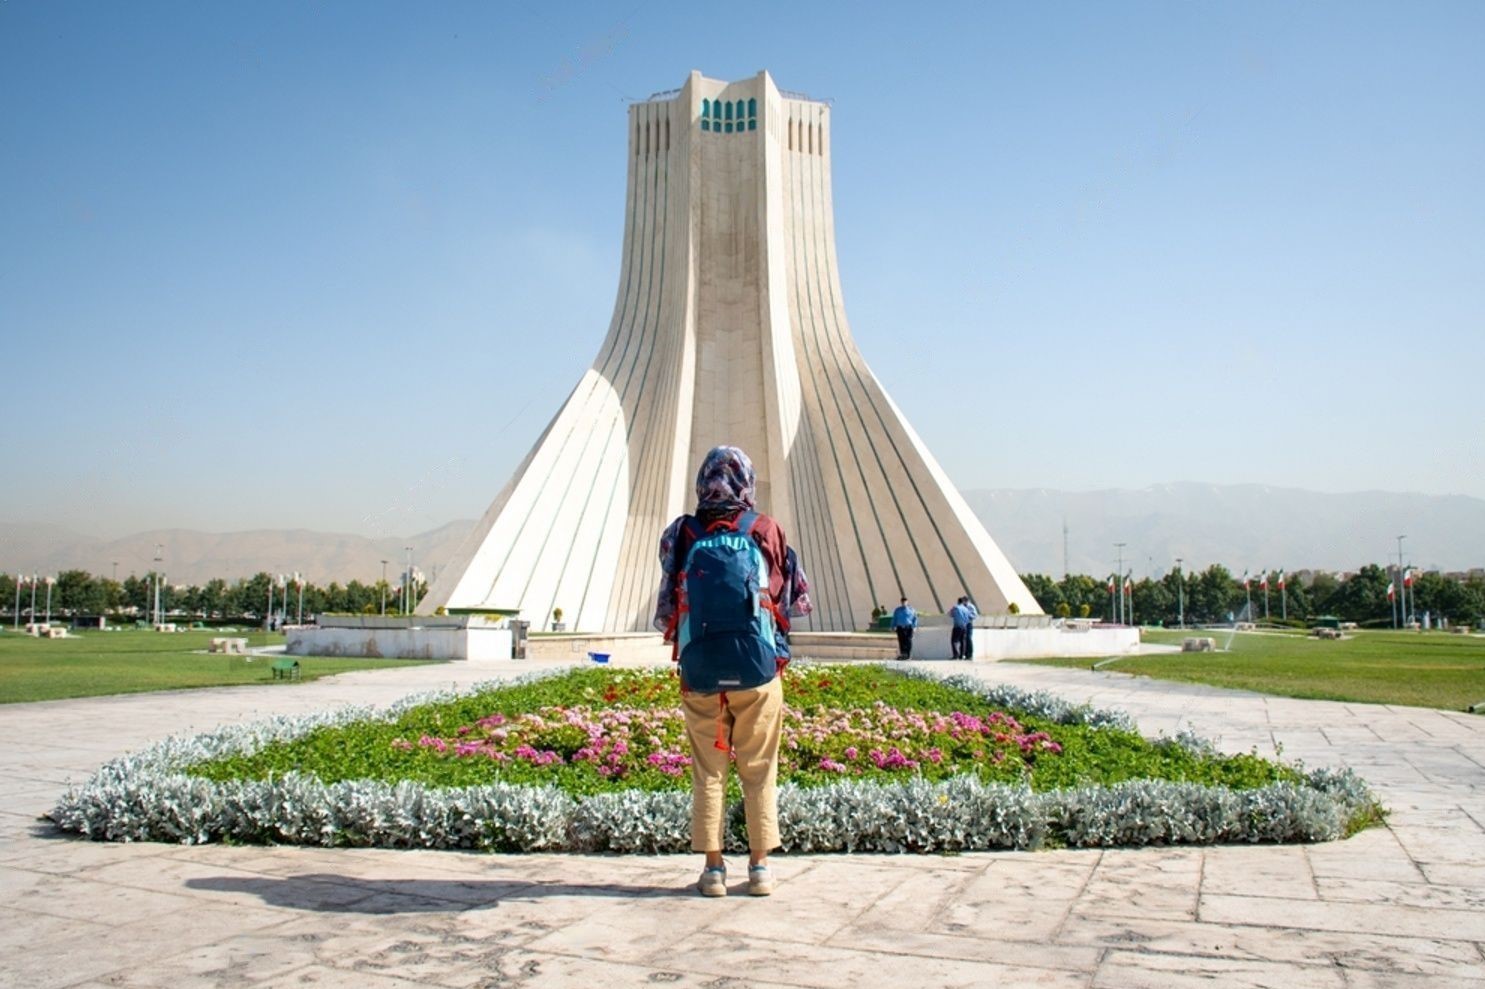 solo travel - Solo Travel in Iran: Visiting Iran as a Woman - Safety and Tips